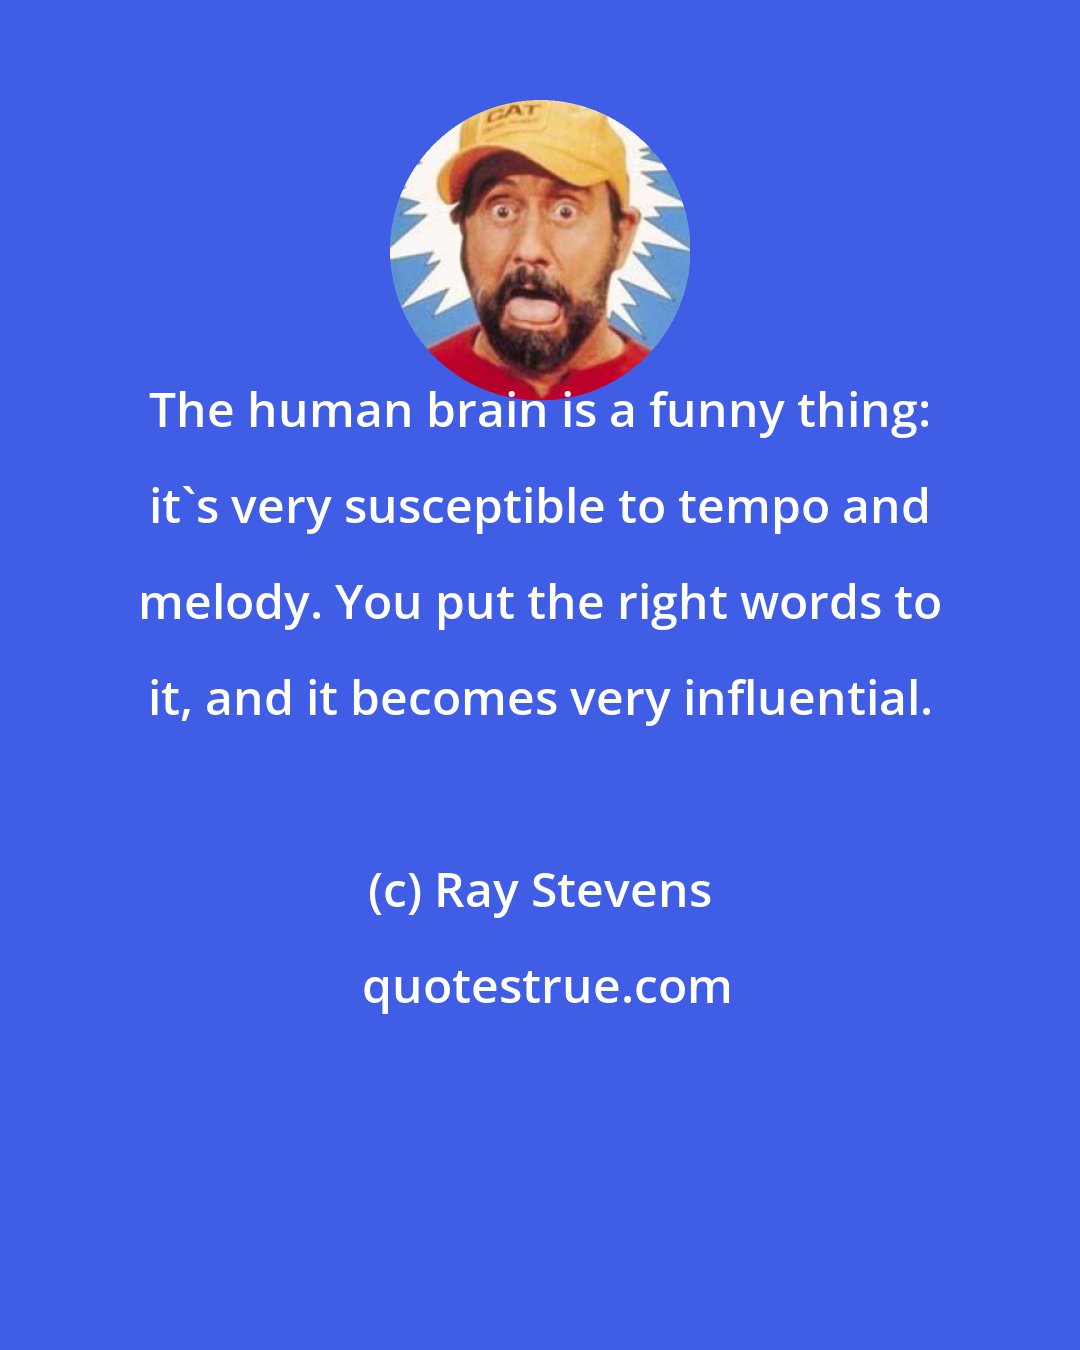 Ray Stevens: The human brain is a funny thing: it's very susceptible to tempo and melody. You put the right words to it, and it becomes very influential.